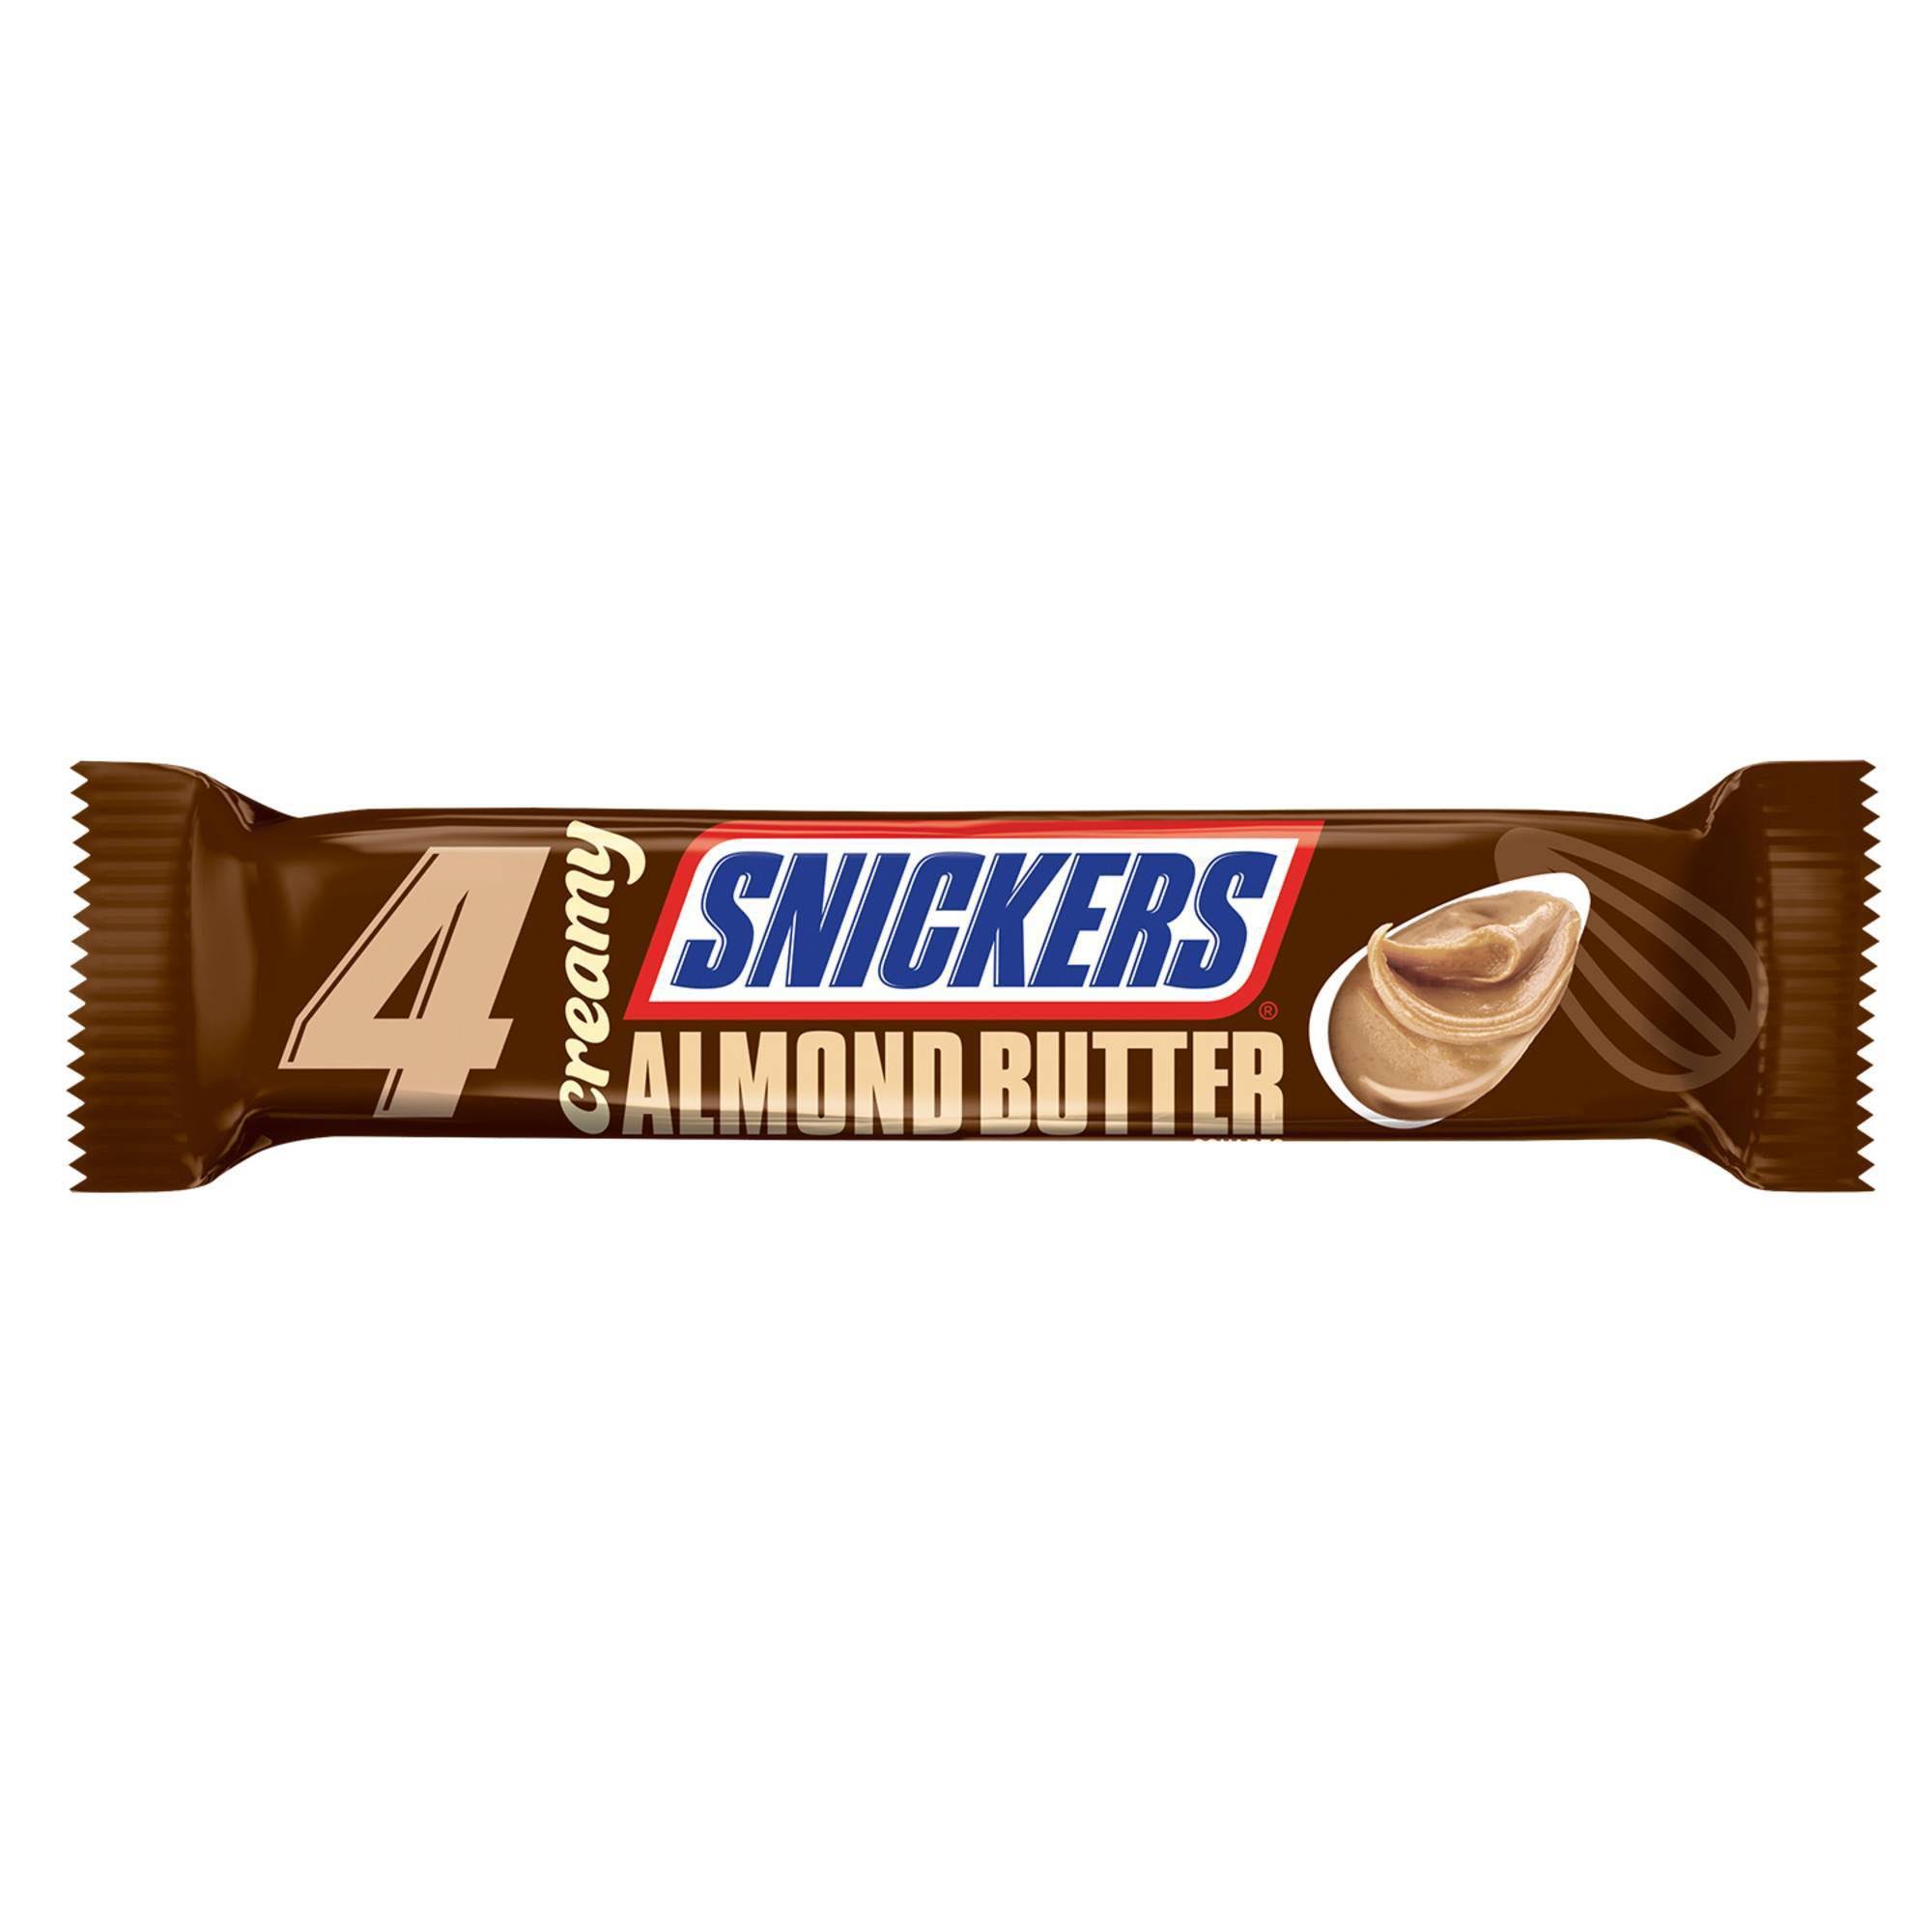 Snickers Almond Butter Squares, Creamy, Share Size - 24 packs, 2.80 oz